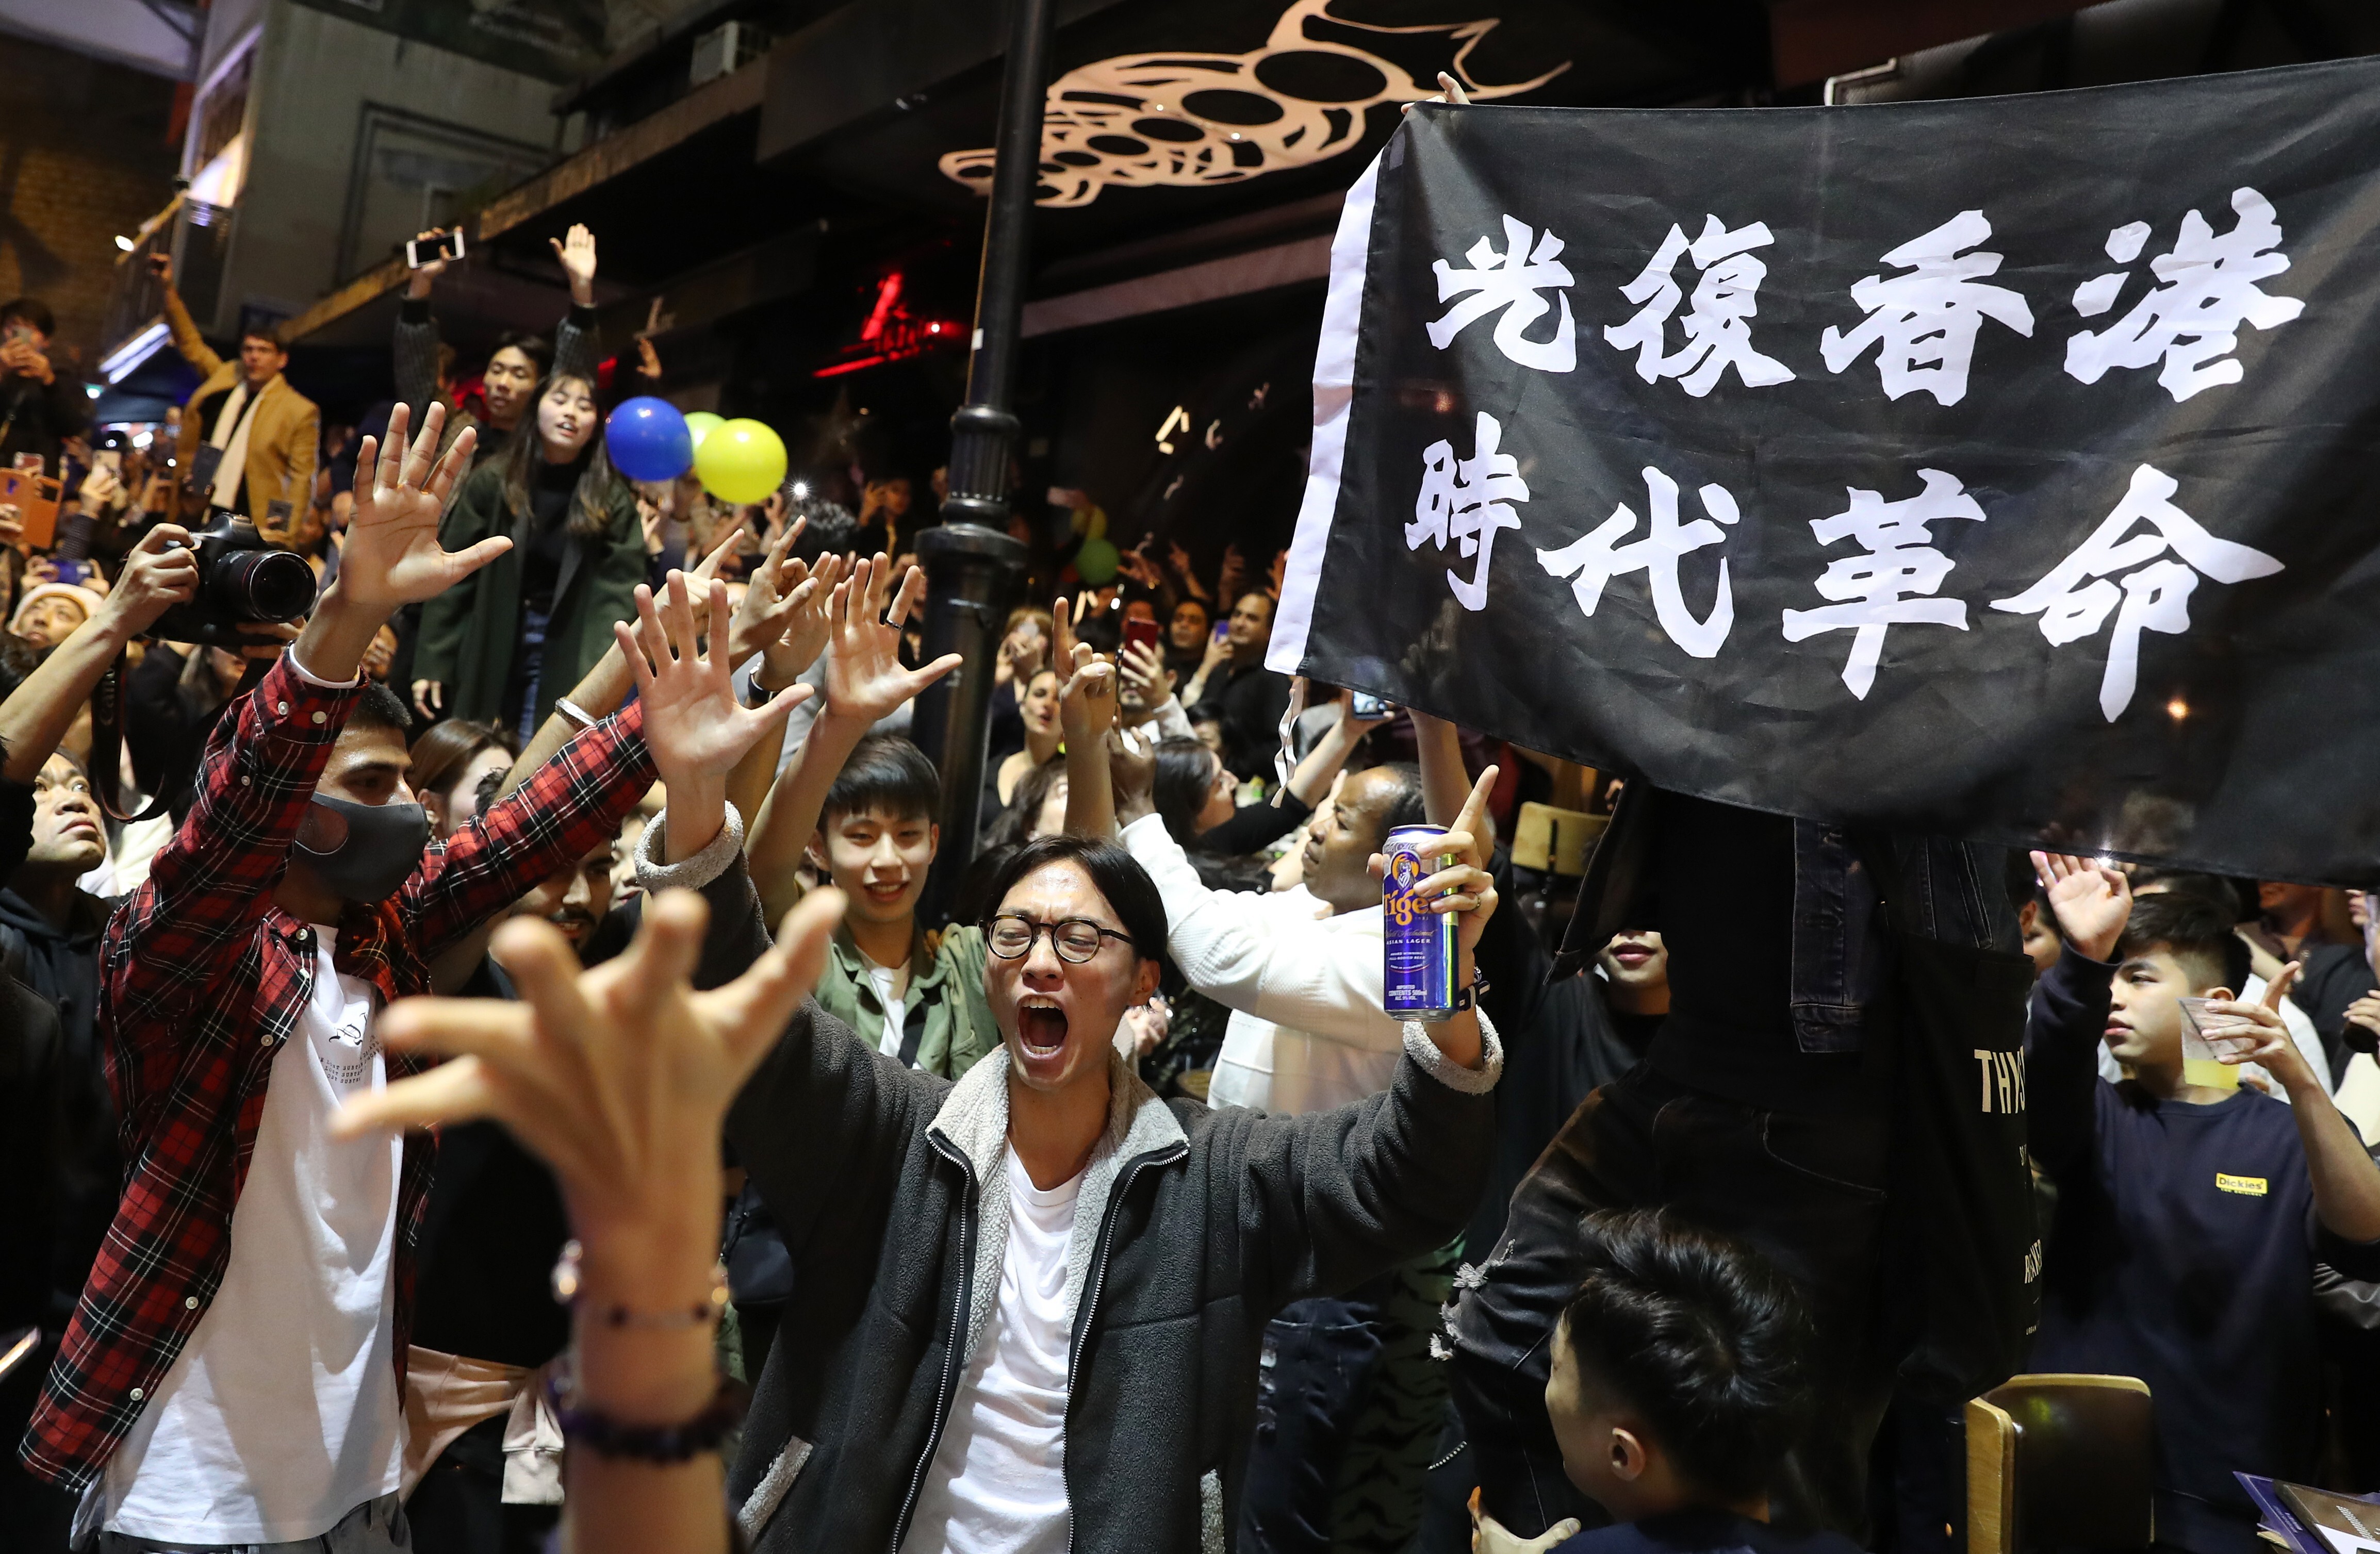 A banner bearing the slogan “Liberate Hong Kong; revolution of our time” is held aloft at a 2020 New Year’s party in Hong Kong’s Central district. Photo: Sam Tsang